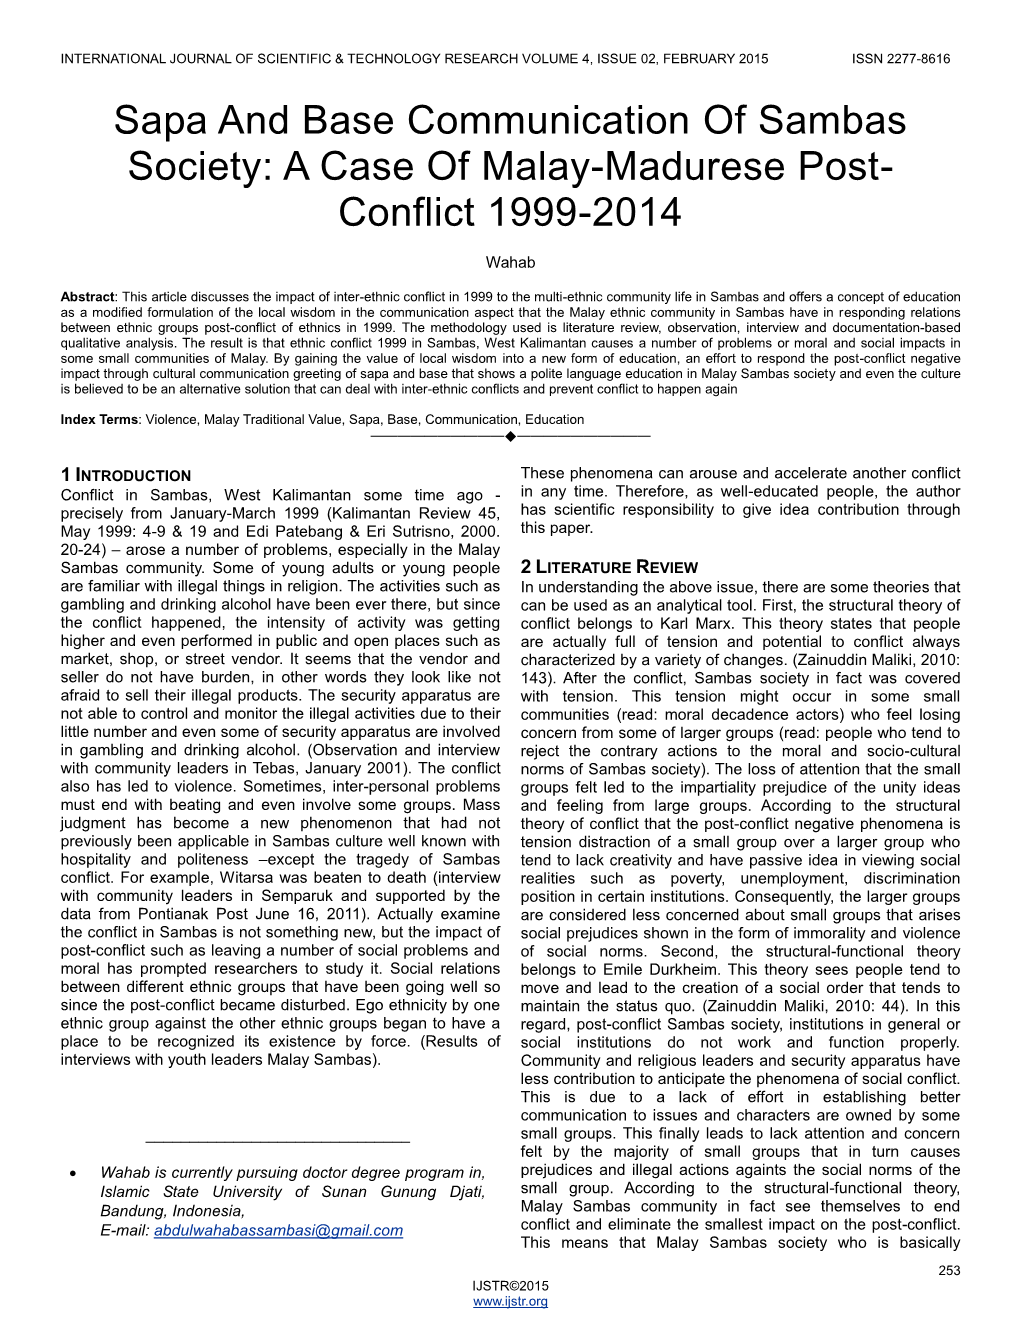 A Case of Malay-Madurese Post- Conflict 1999-2014